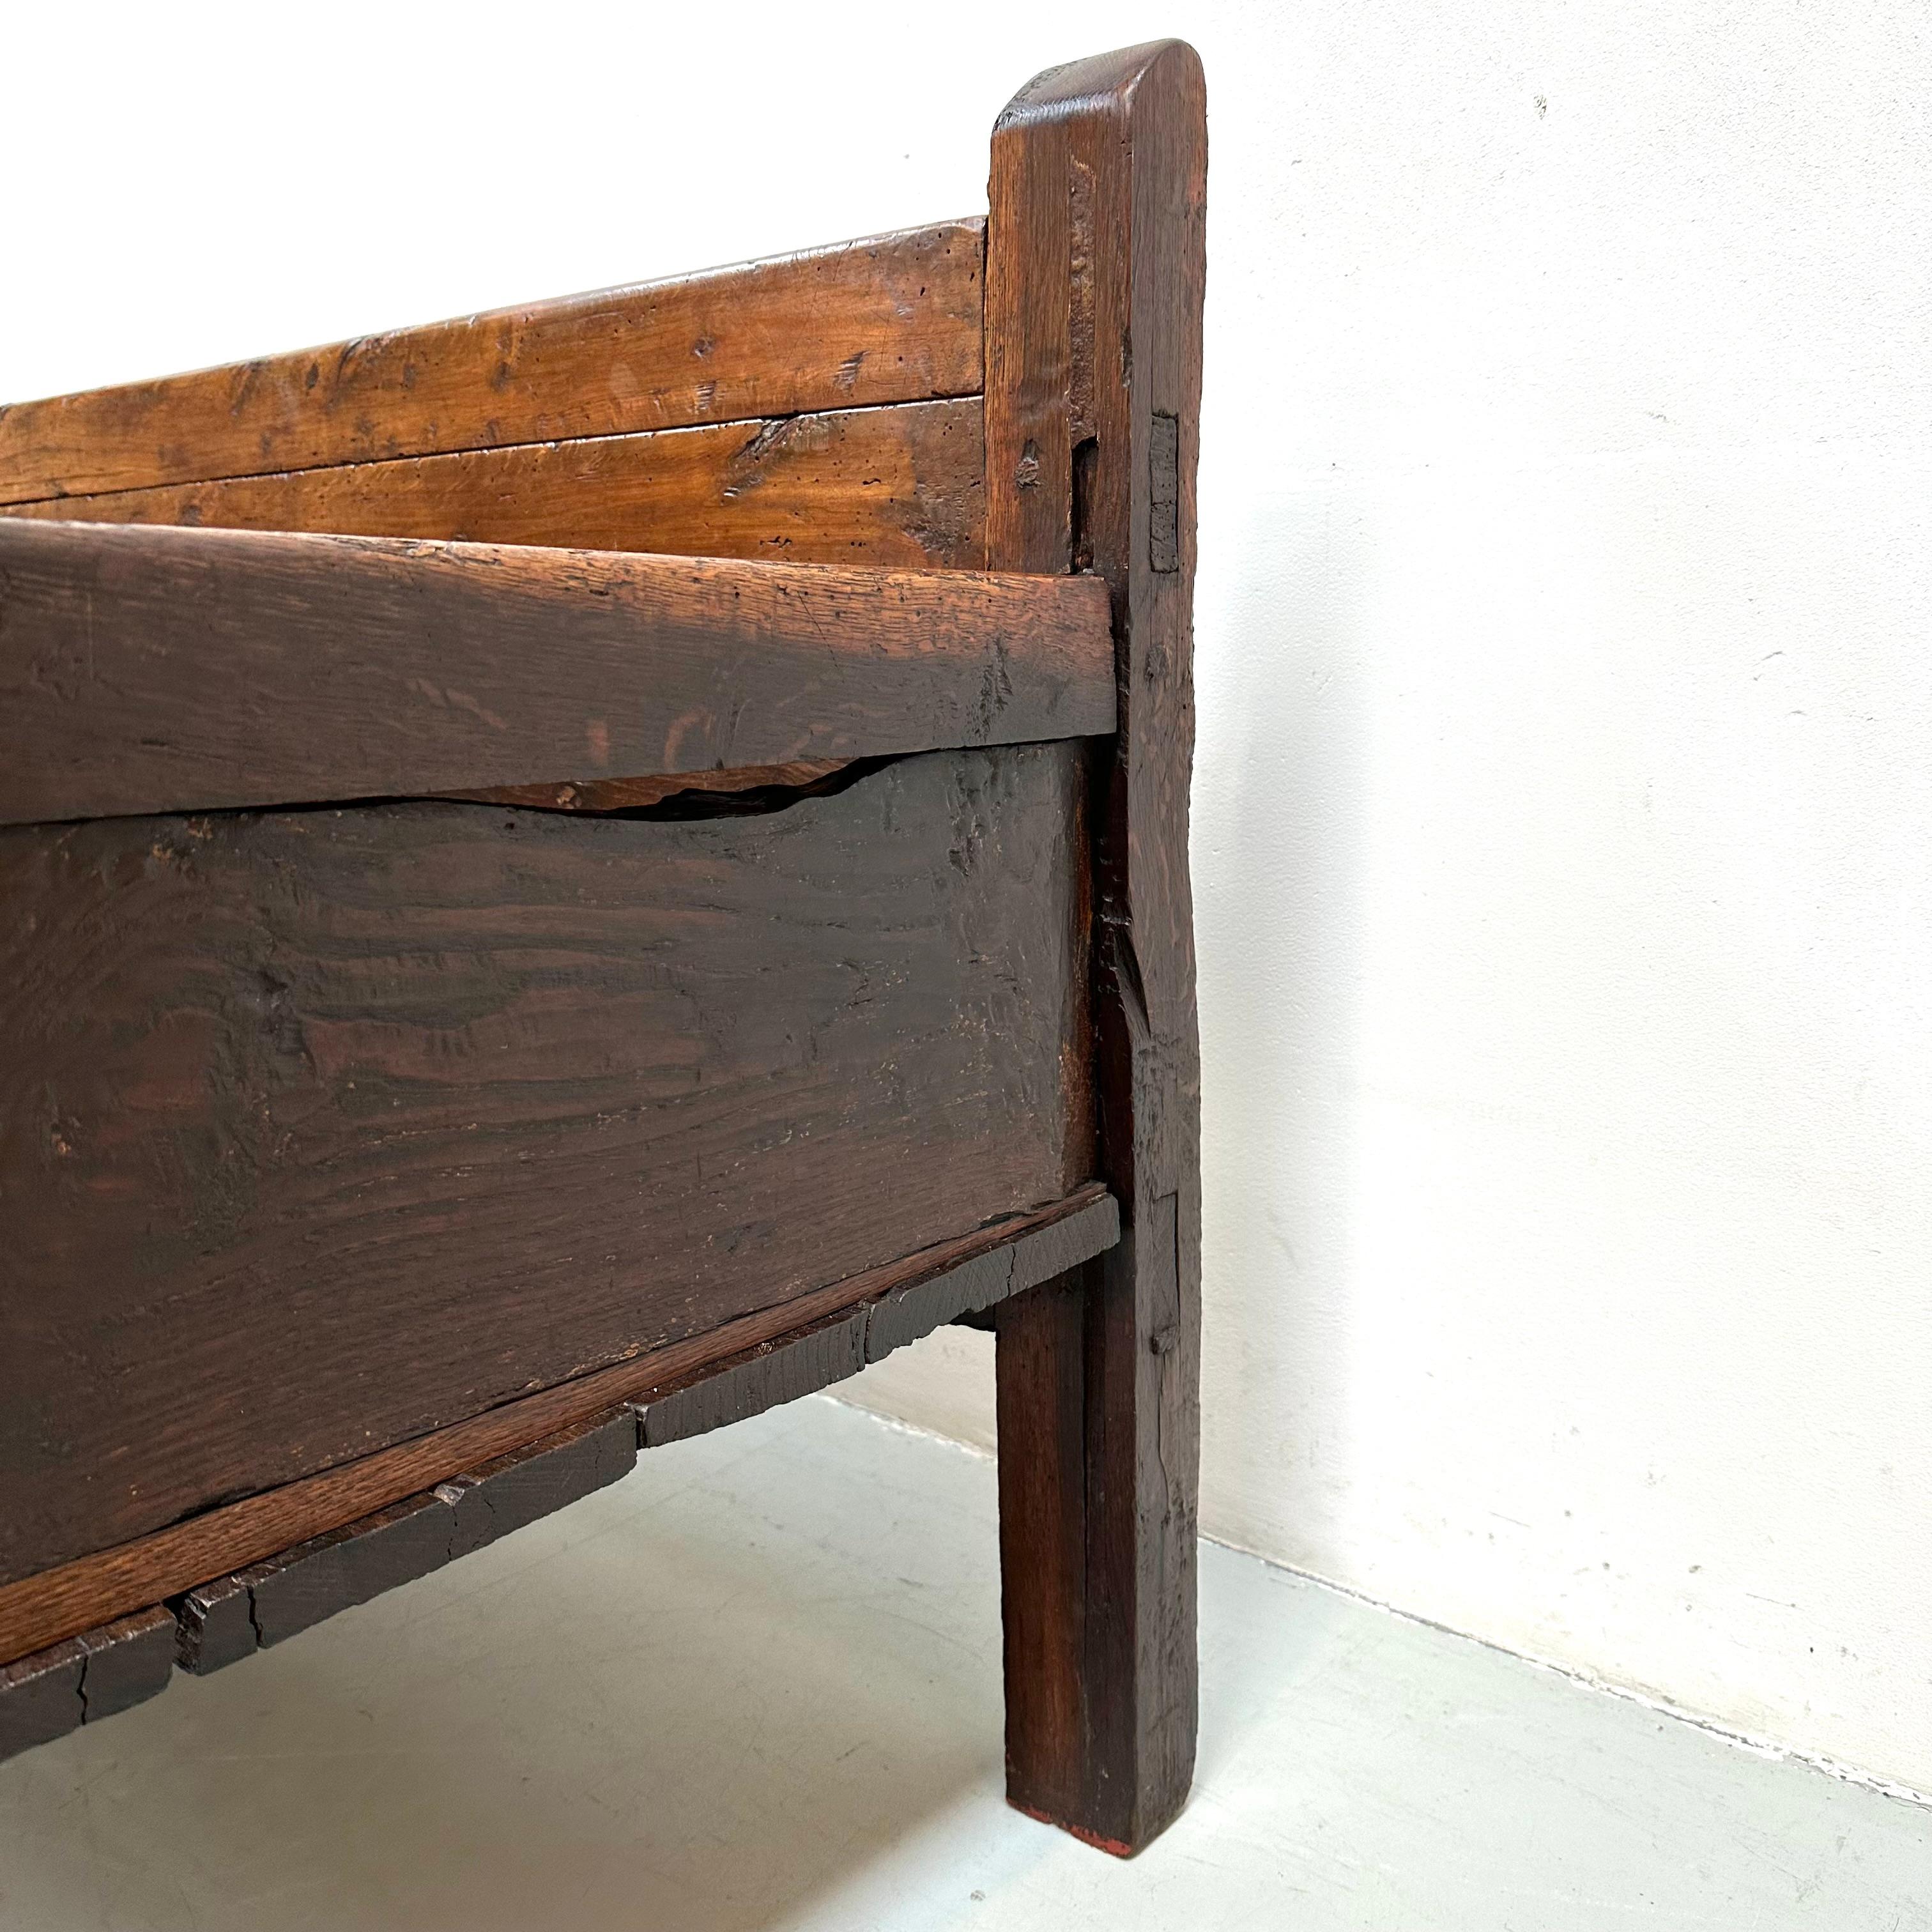 Antique Handmade Minimalistic Spanish Chestnut Wood Bench, Early 19th Century For Sale 2